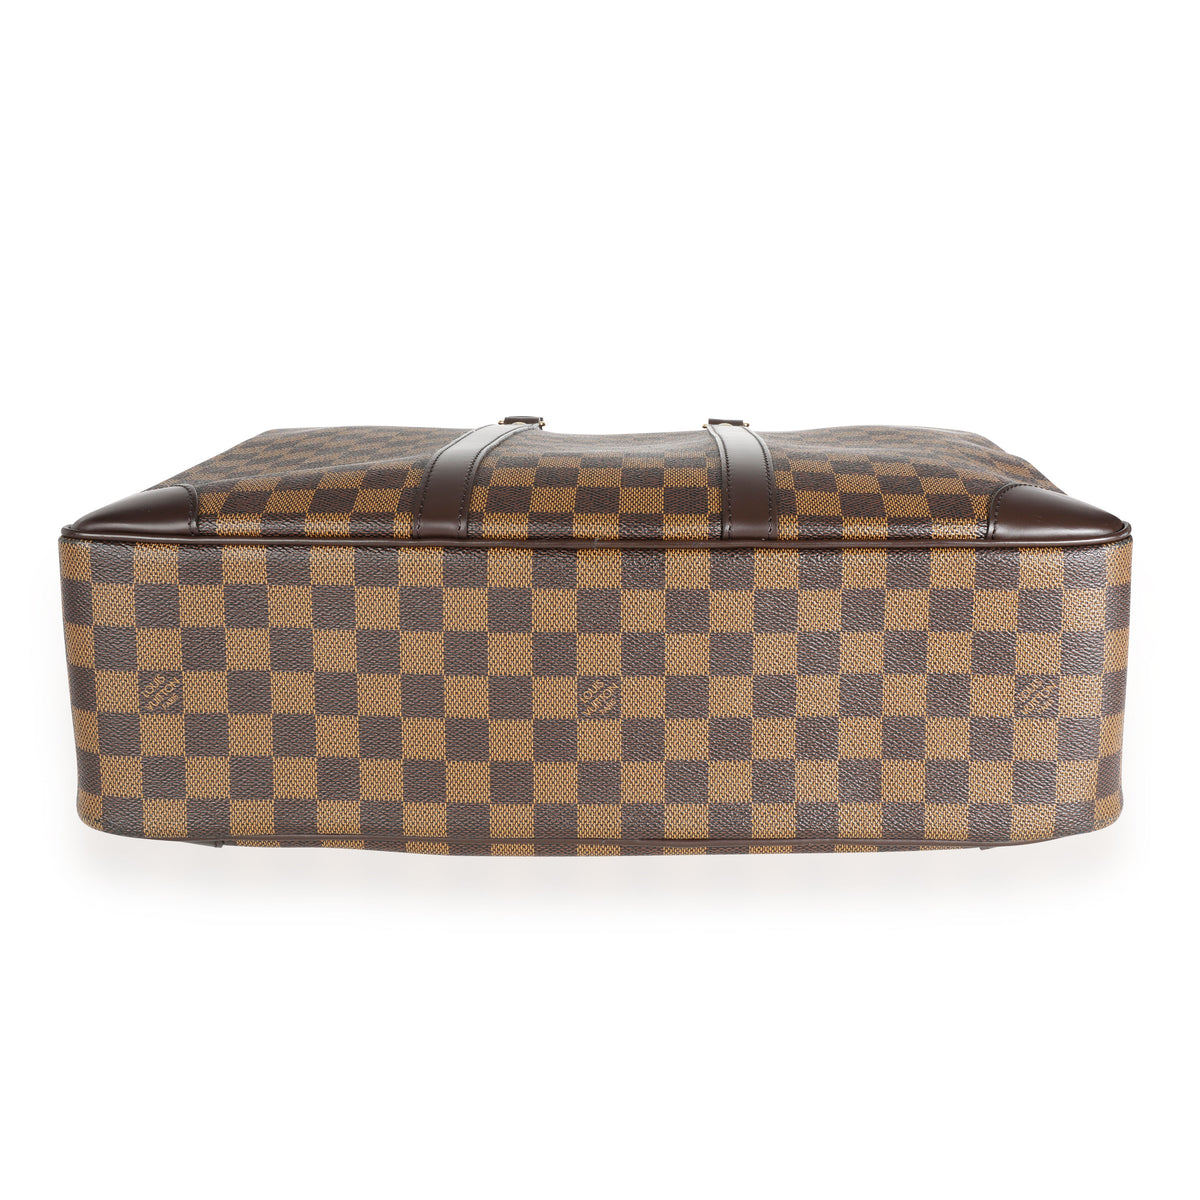 LOUIS VUITTON - Porte-Documents Voyage GM Review and